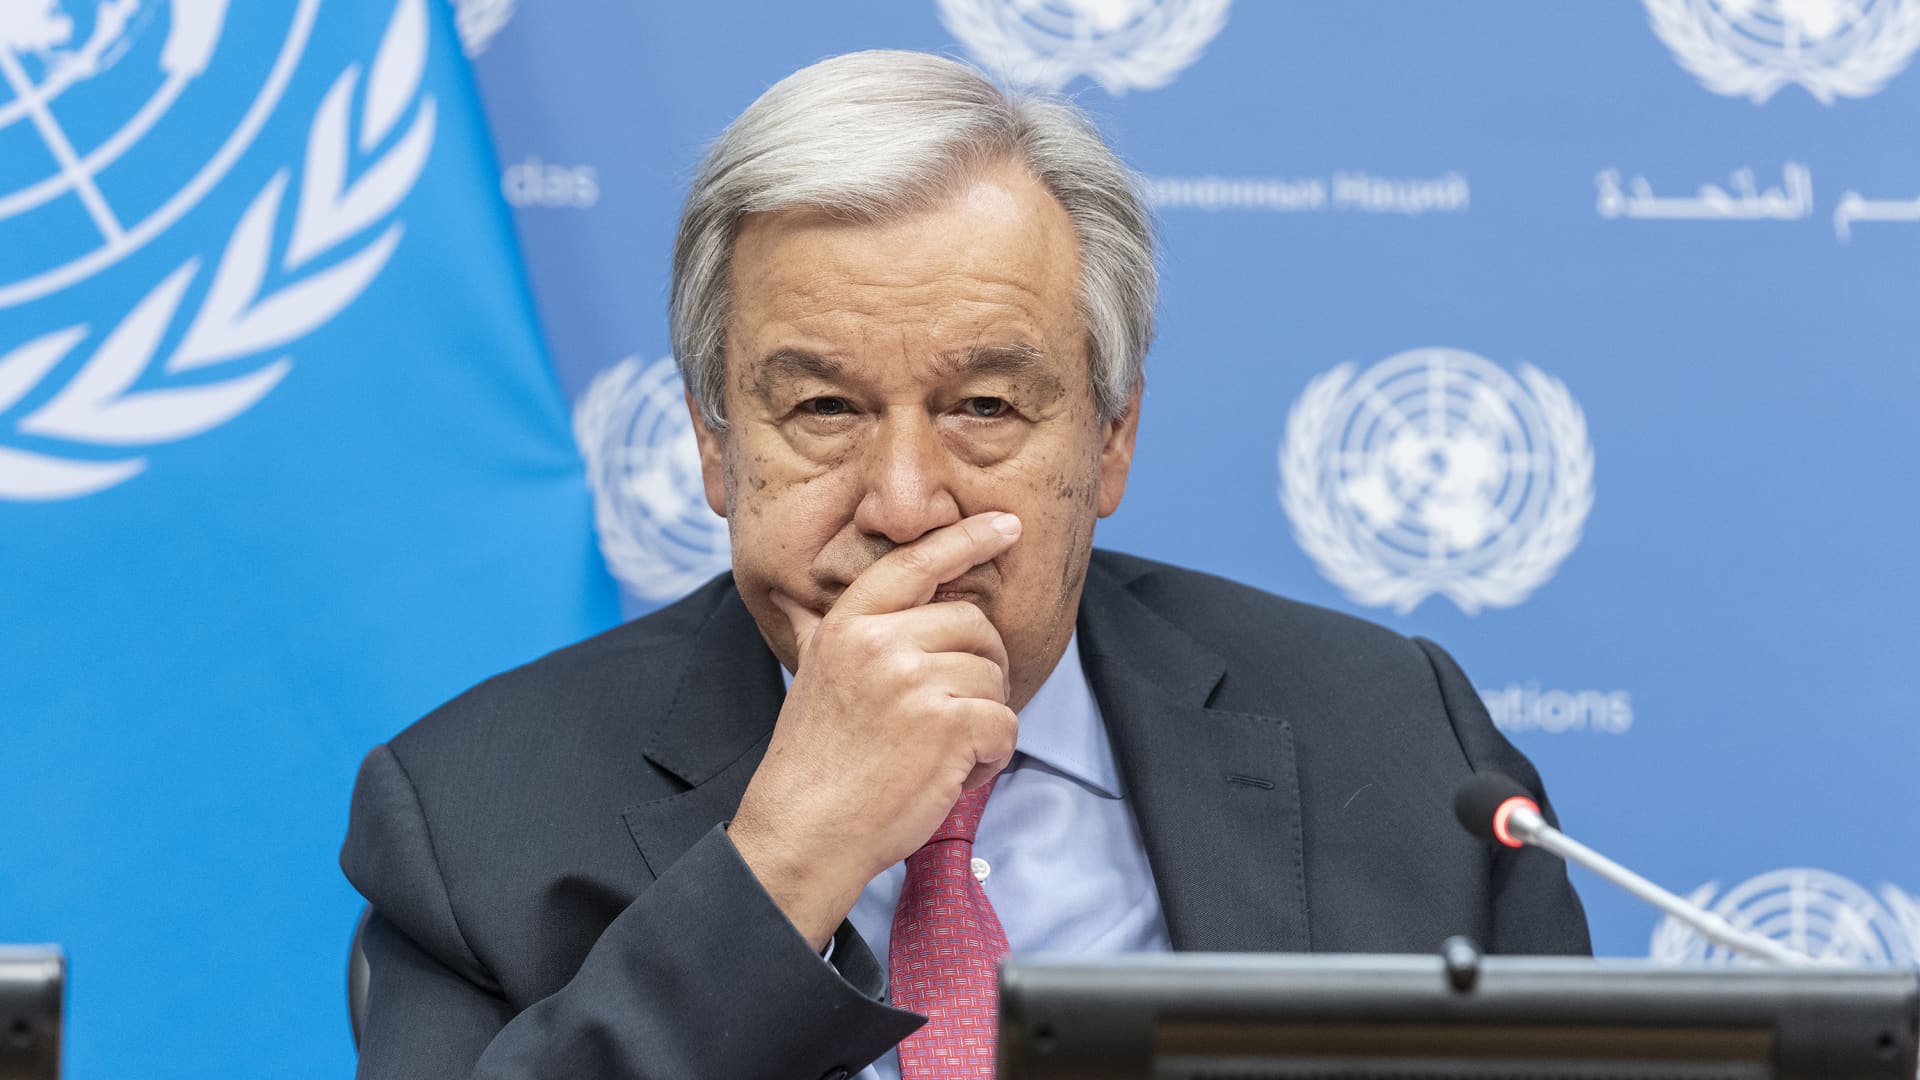 Secretary-General Antonio Guterres conducts a press briefing on the launch of the 3rd brief by the GCRG (Global Crisis Response Group) on Food, Energy and Finance at UN Headquarters.